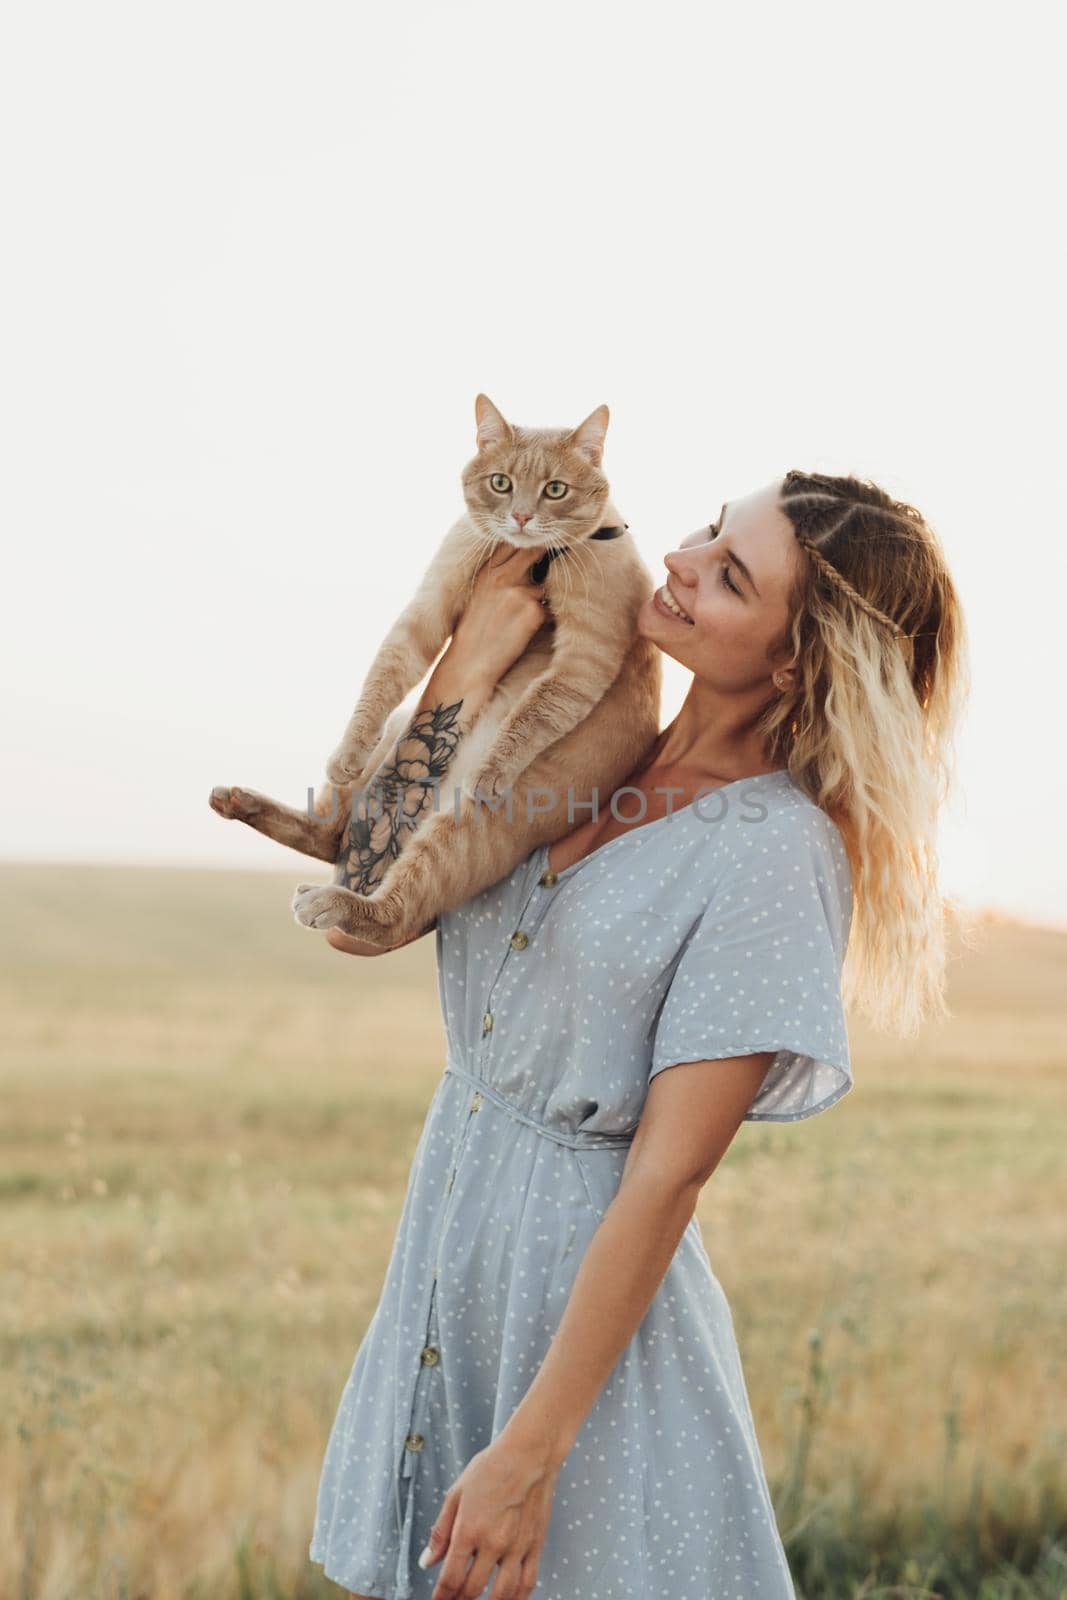 Caucasian Young Woman Dressed in Blue Dress Holding Her Cat Outdoors at Sunset